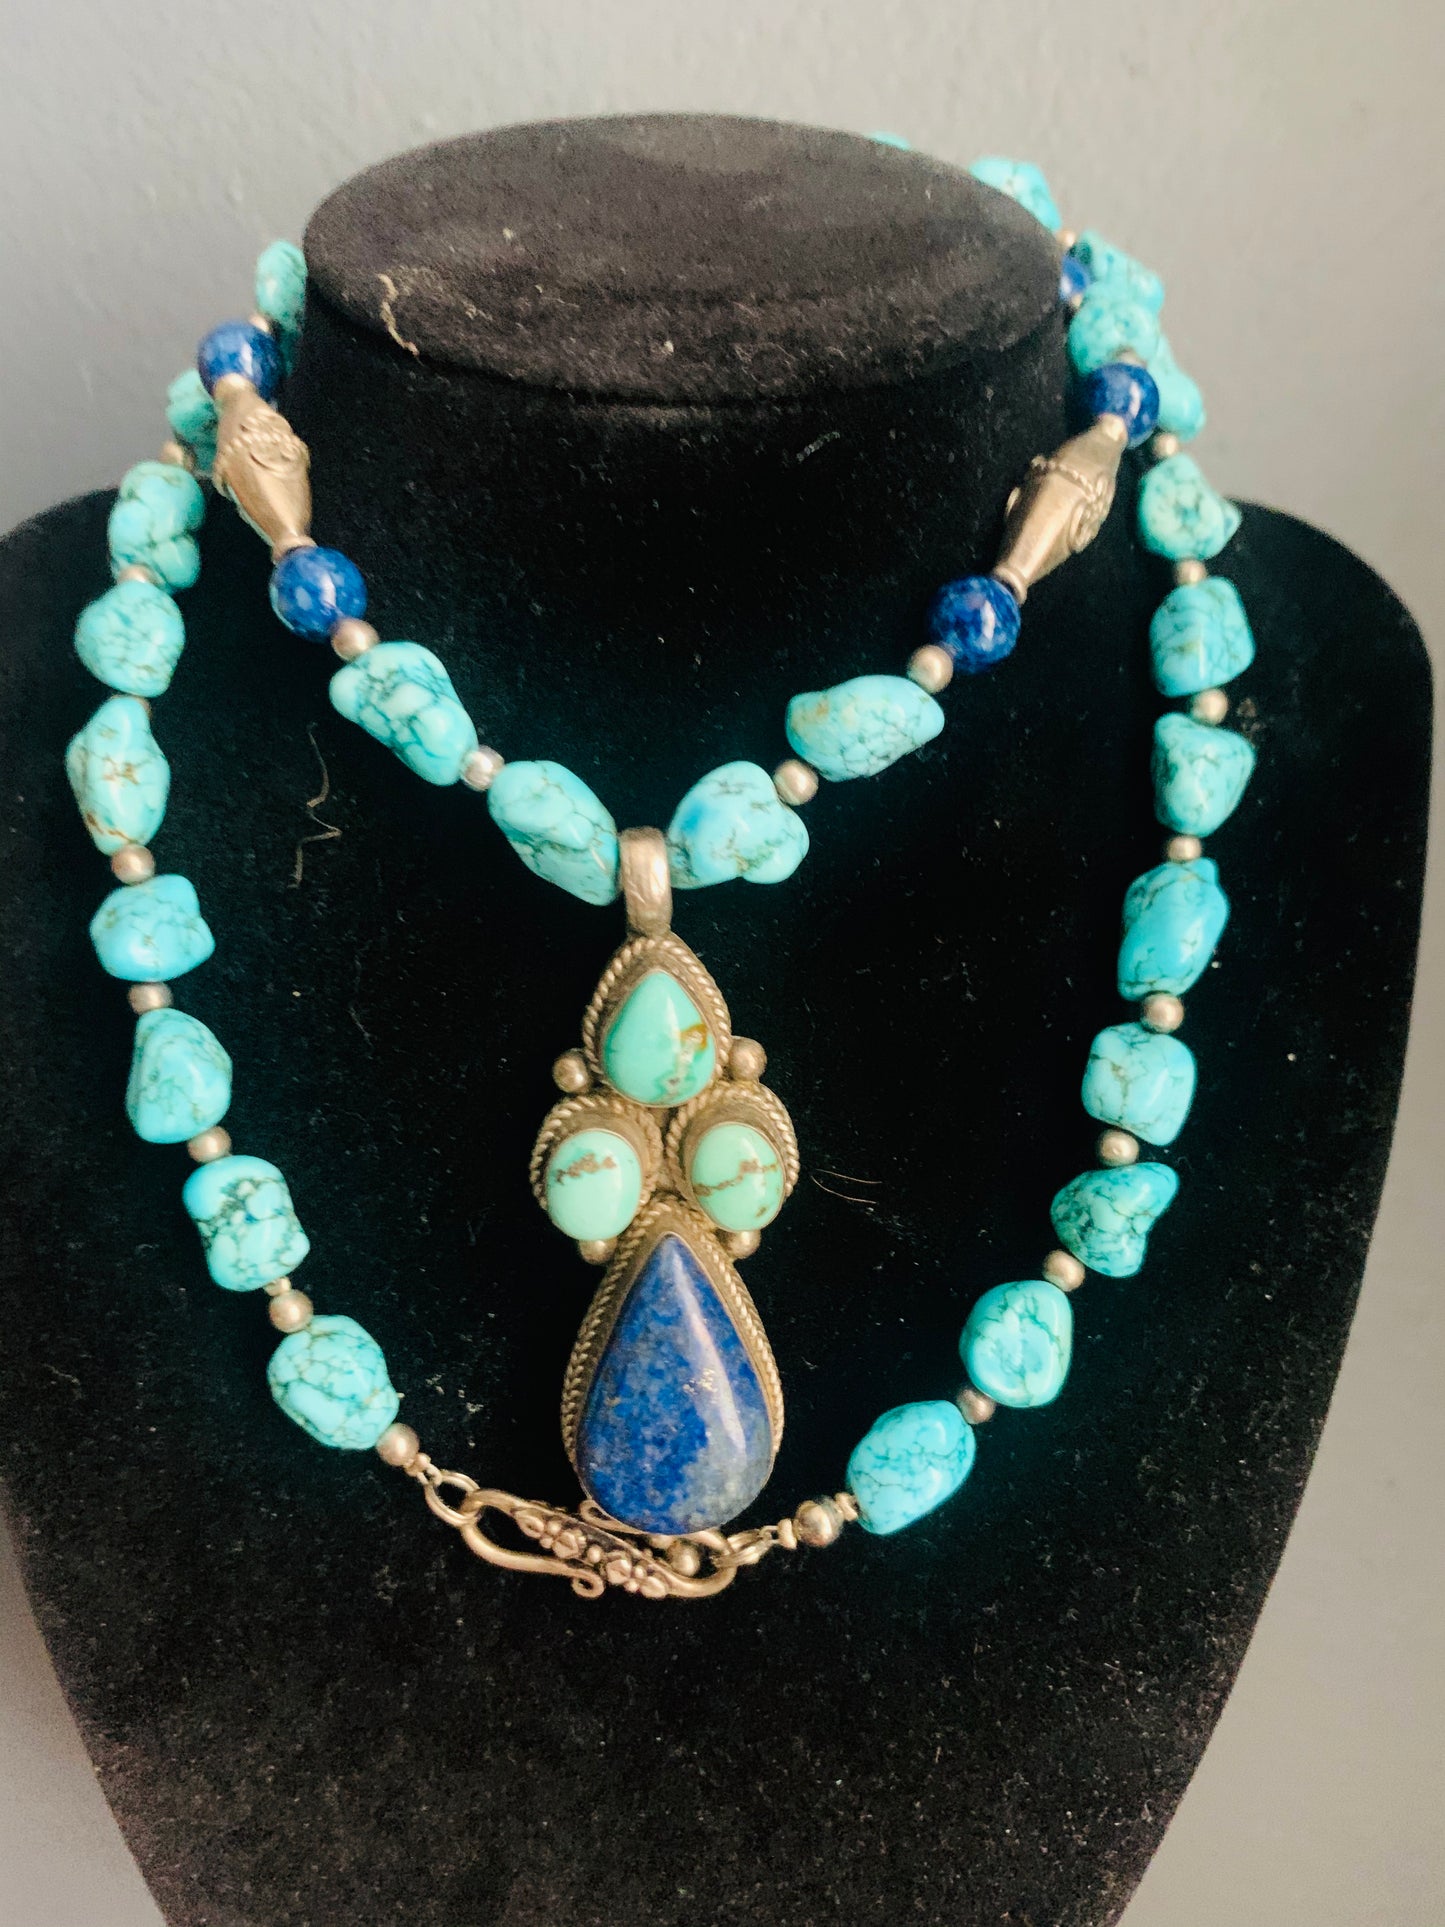 A turquoise and lapis necklace with pendant